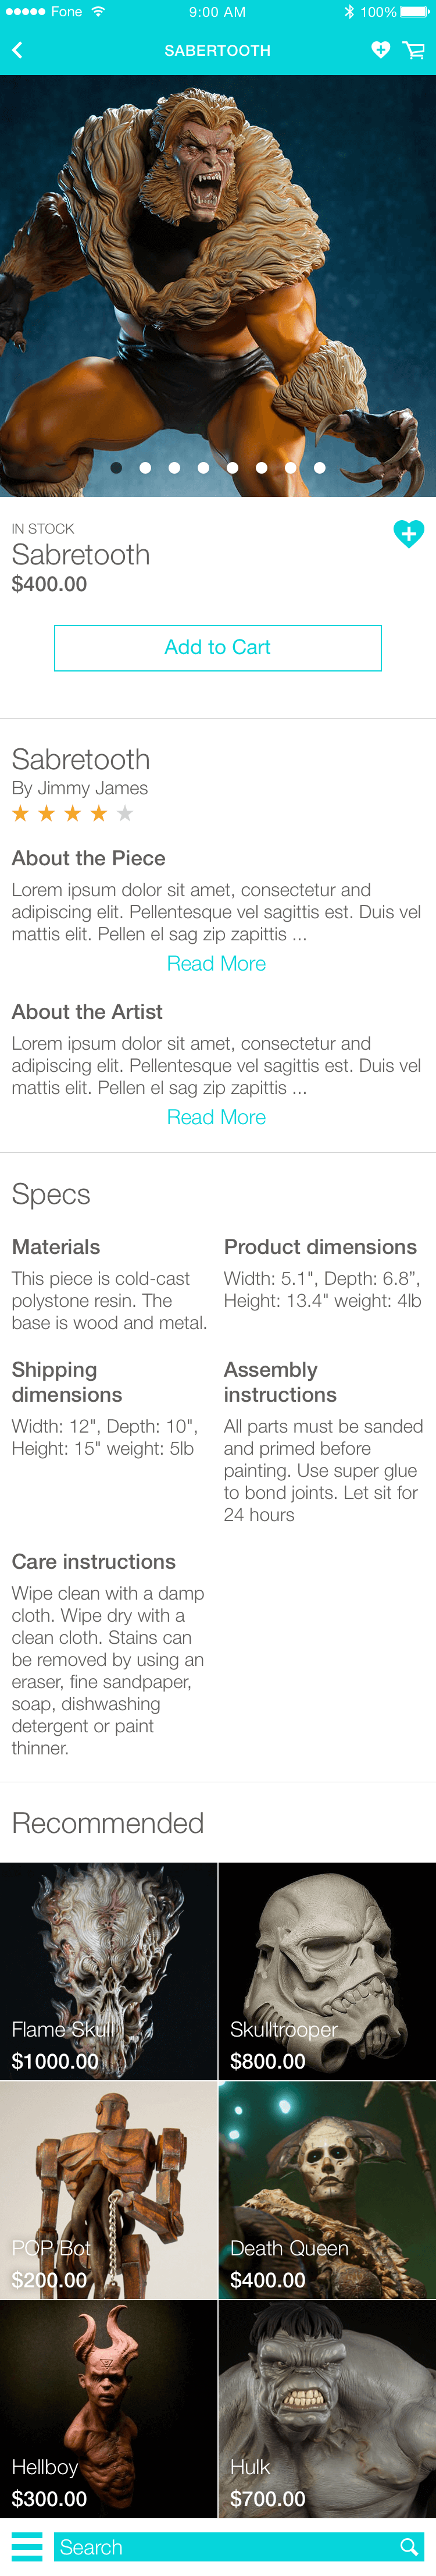 true2-iPhone 6 product page long